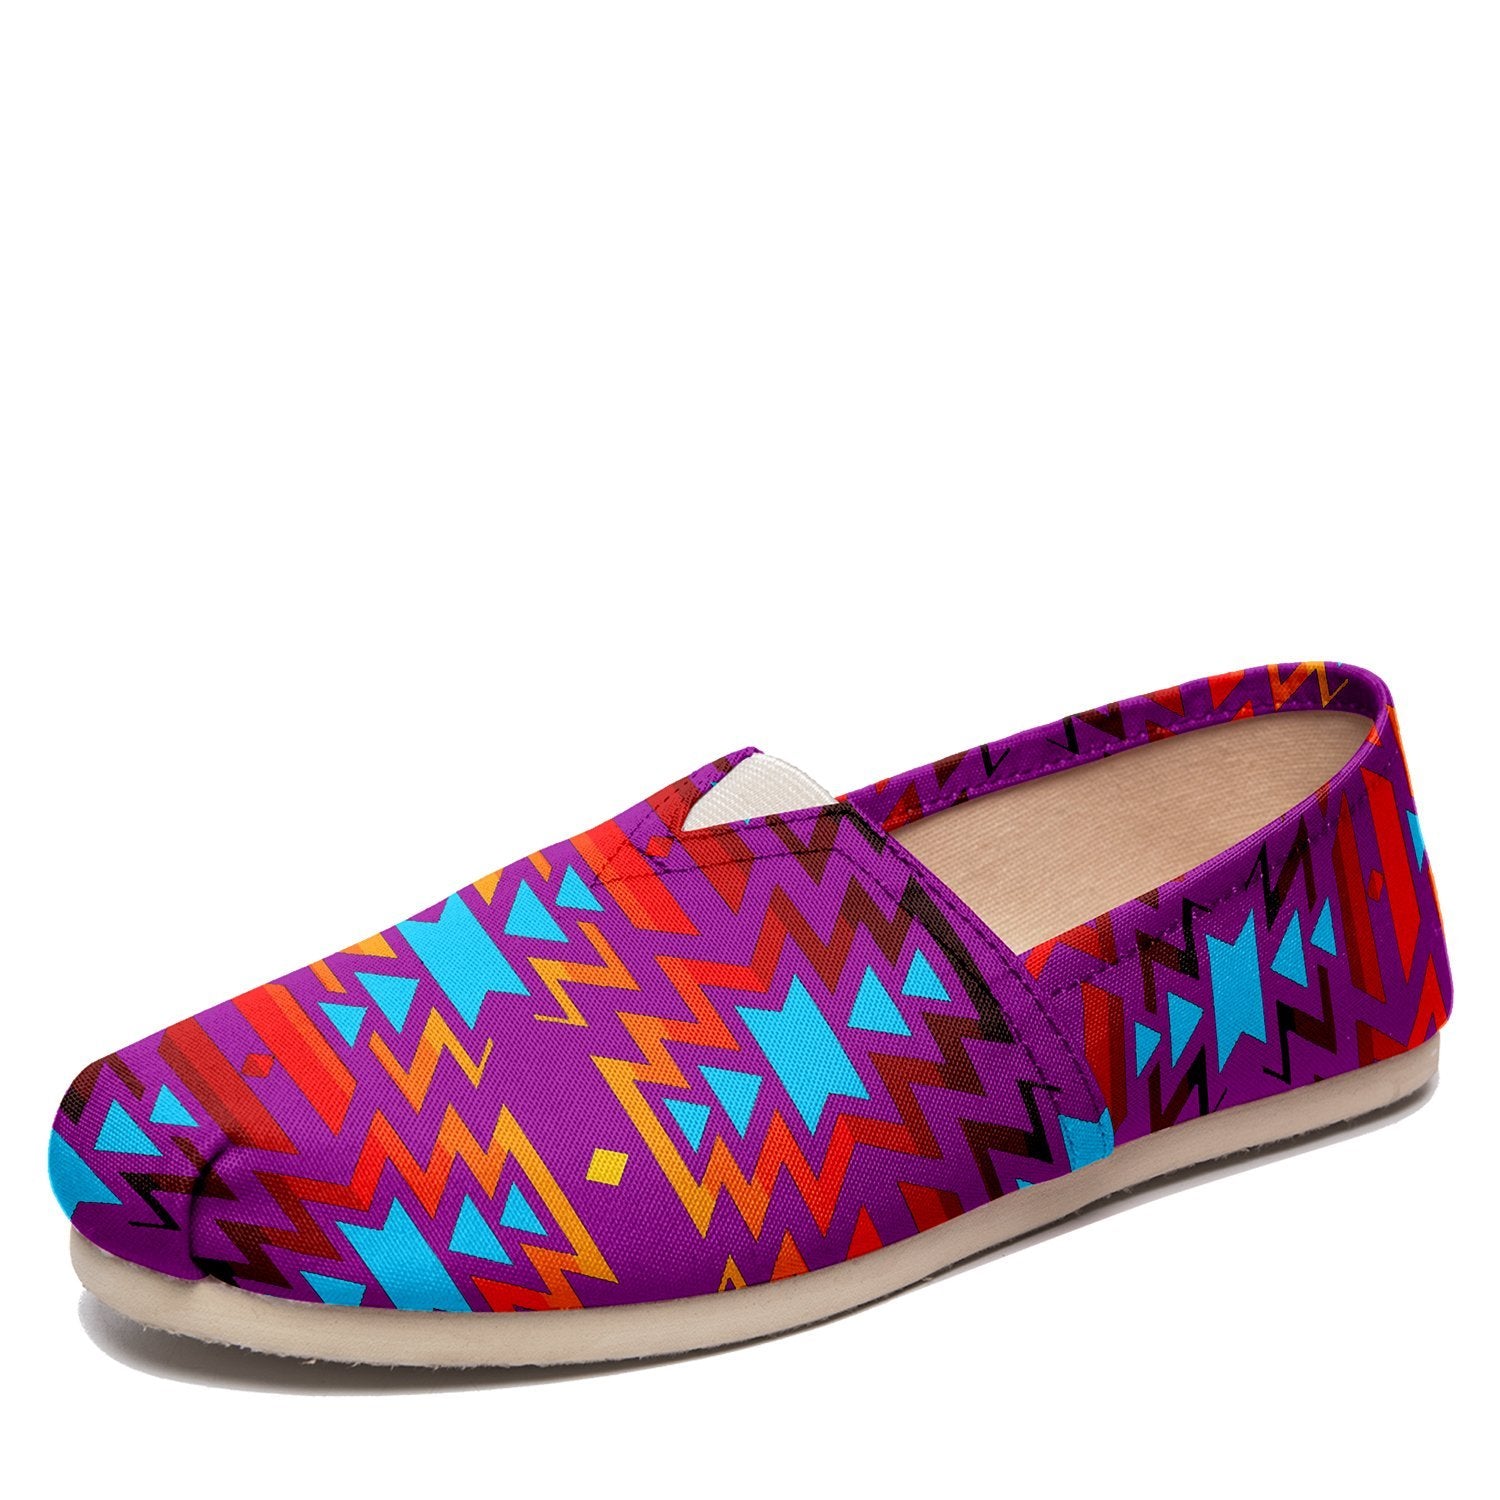 Fire Colors and Turquoise Purple Casual Unisex Slip On Shoe Herman 